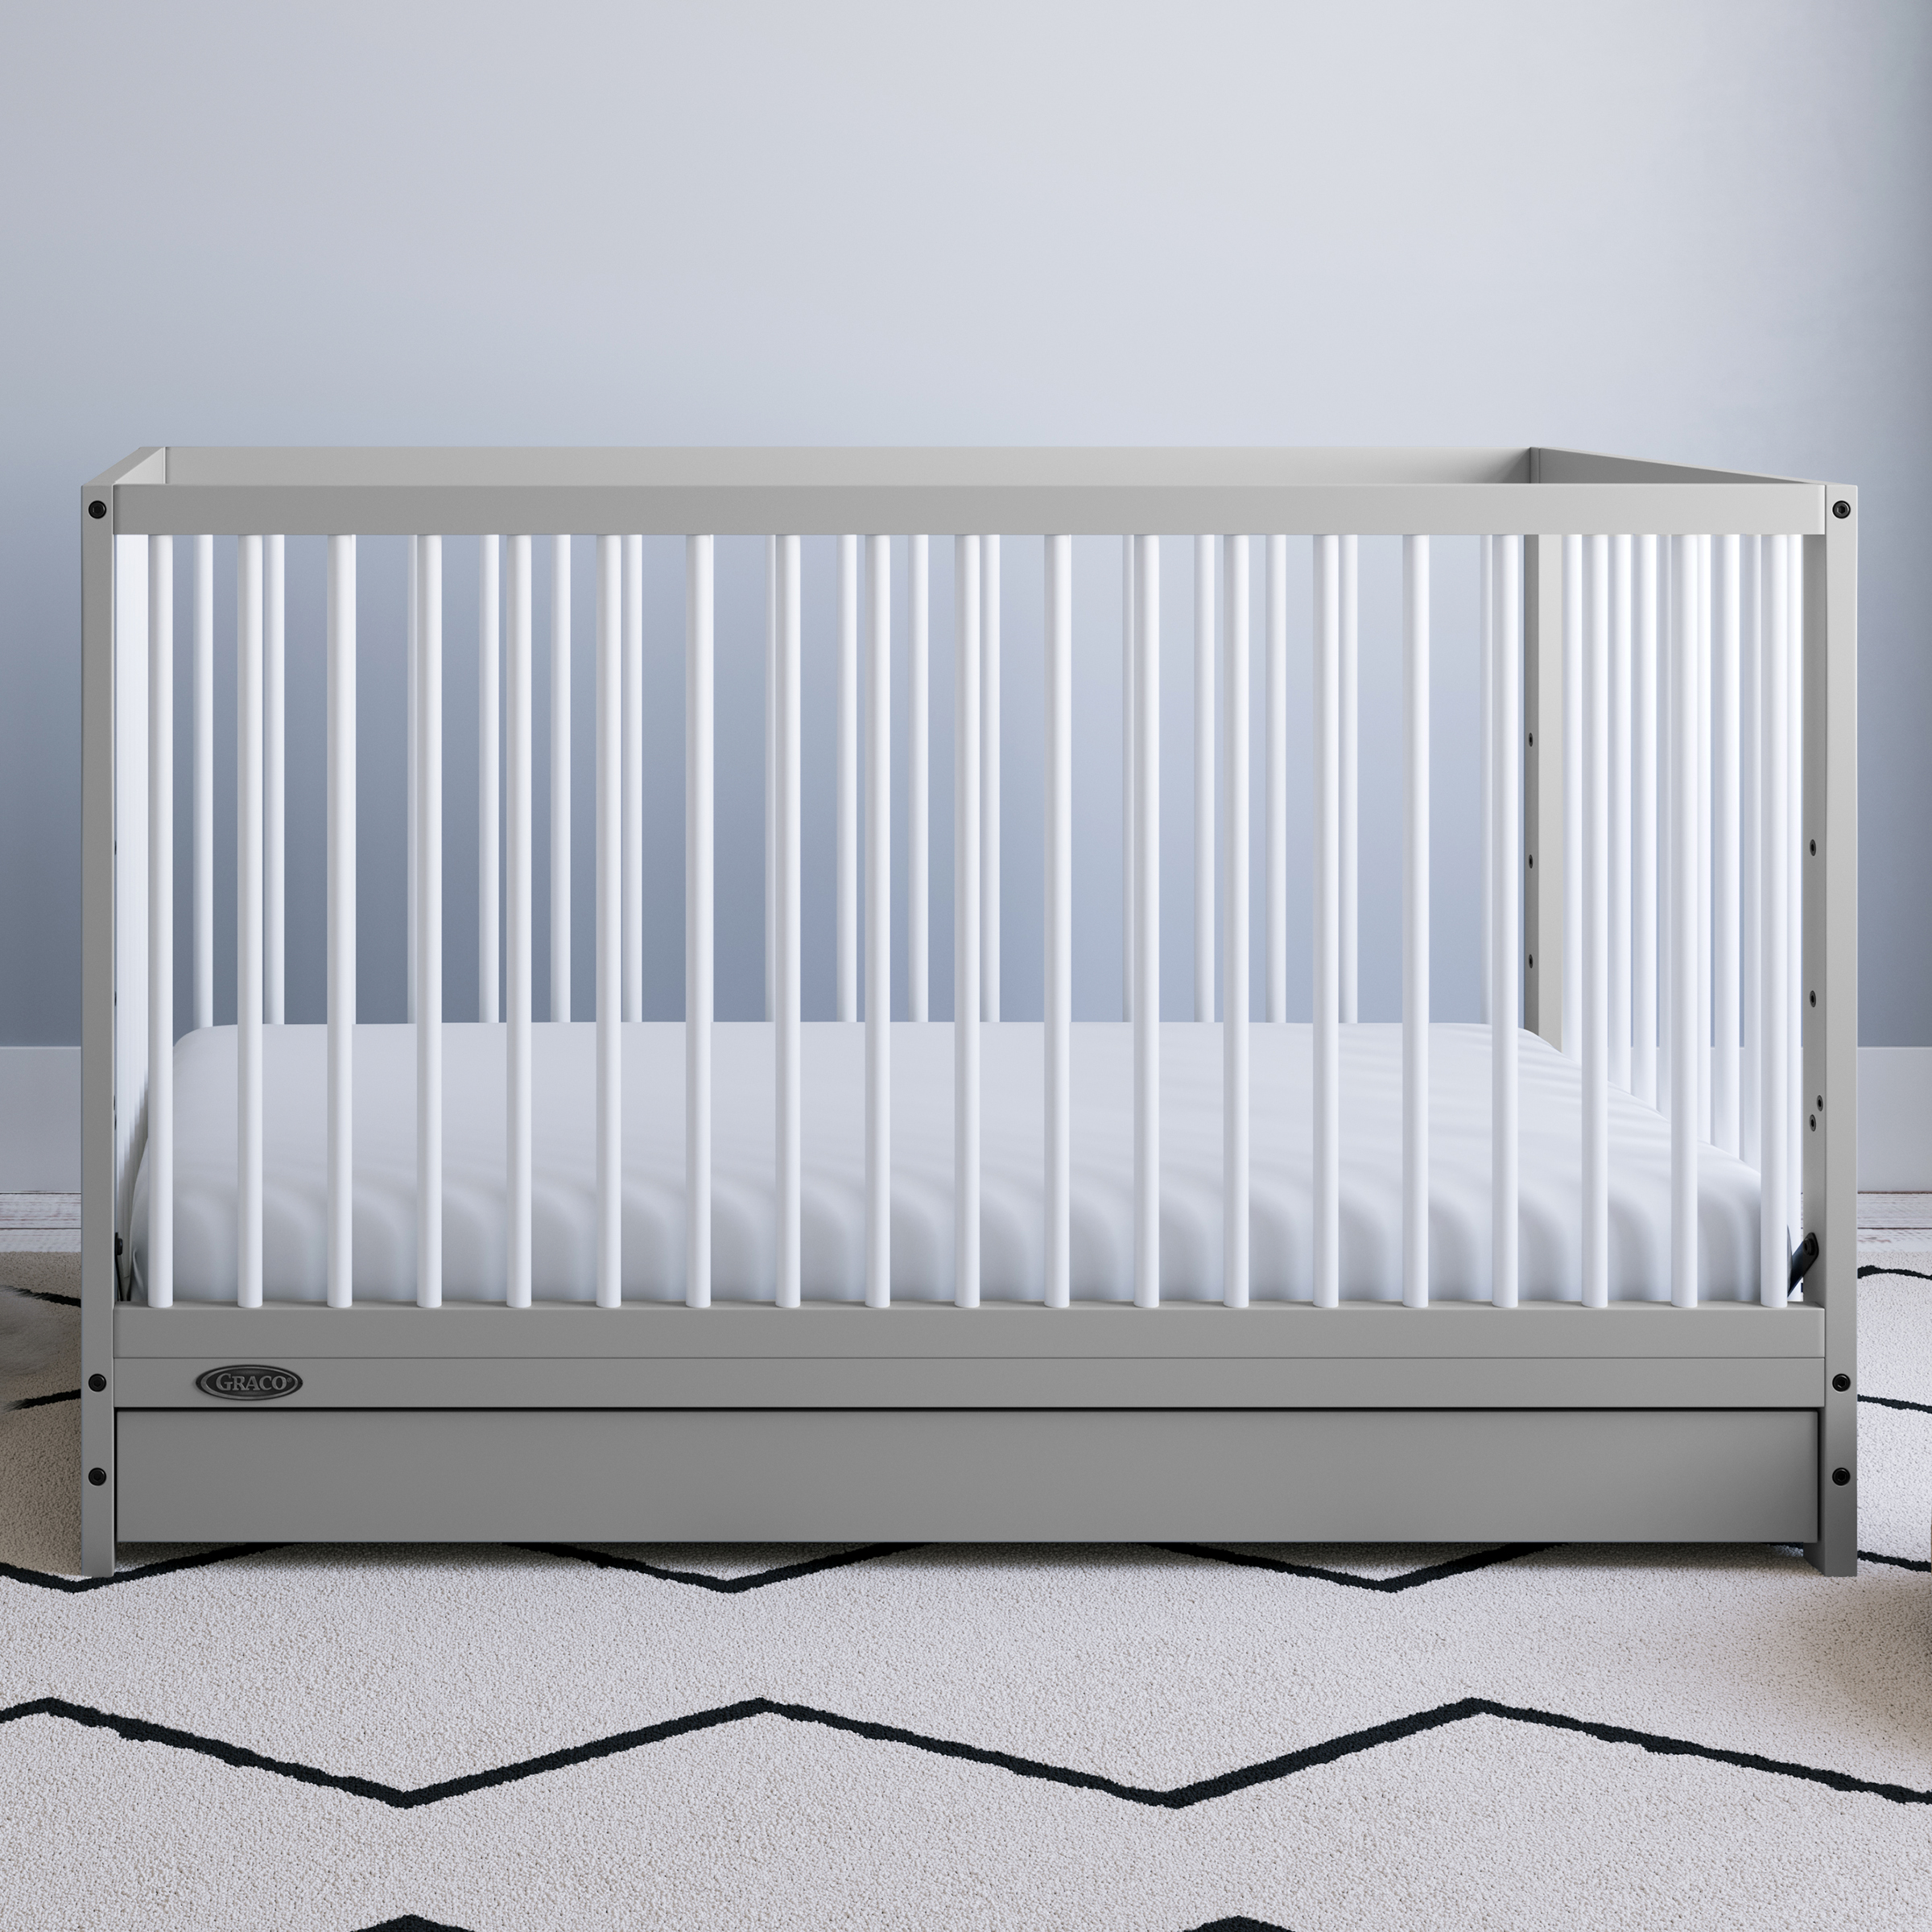 Graco Teddi 5-in-1 Convertible Baby Crib with Drawer, Pebble Gray and White - image 3 of 14